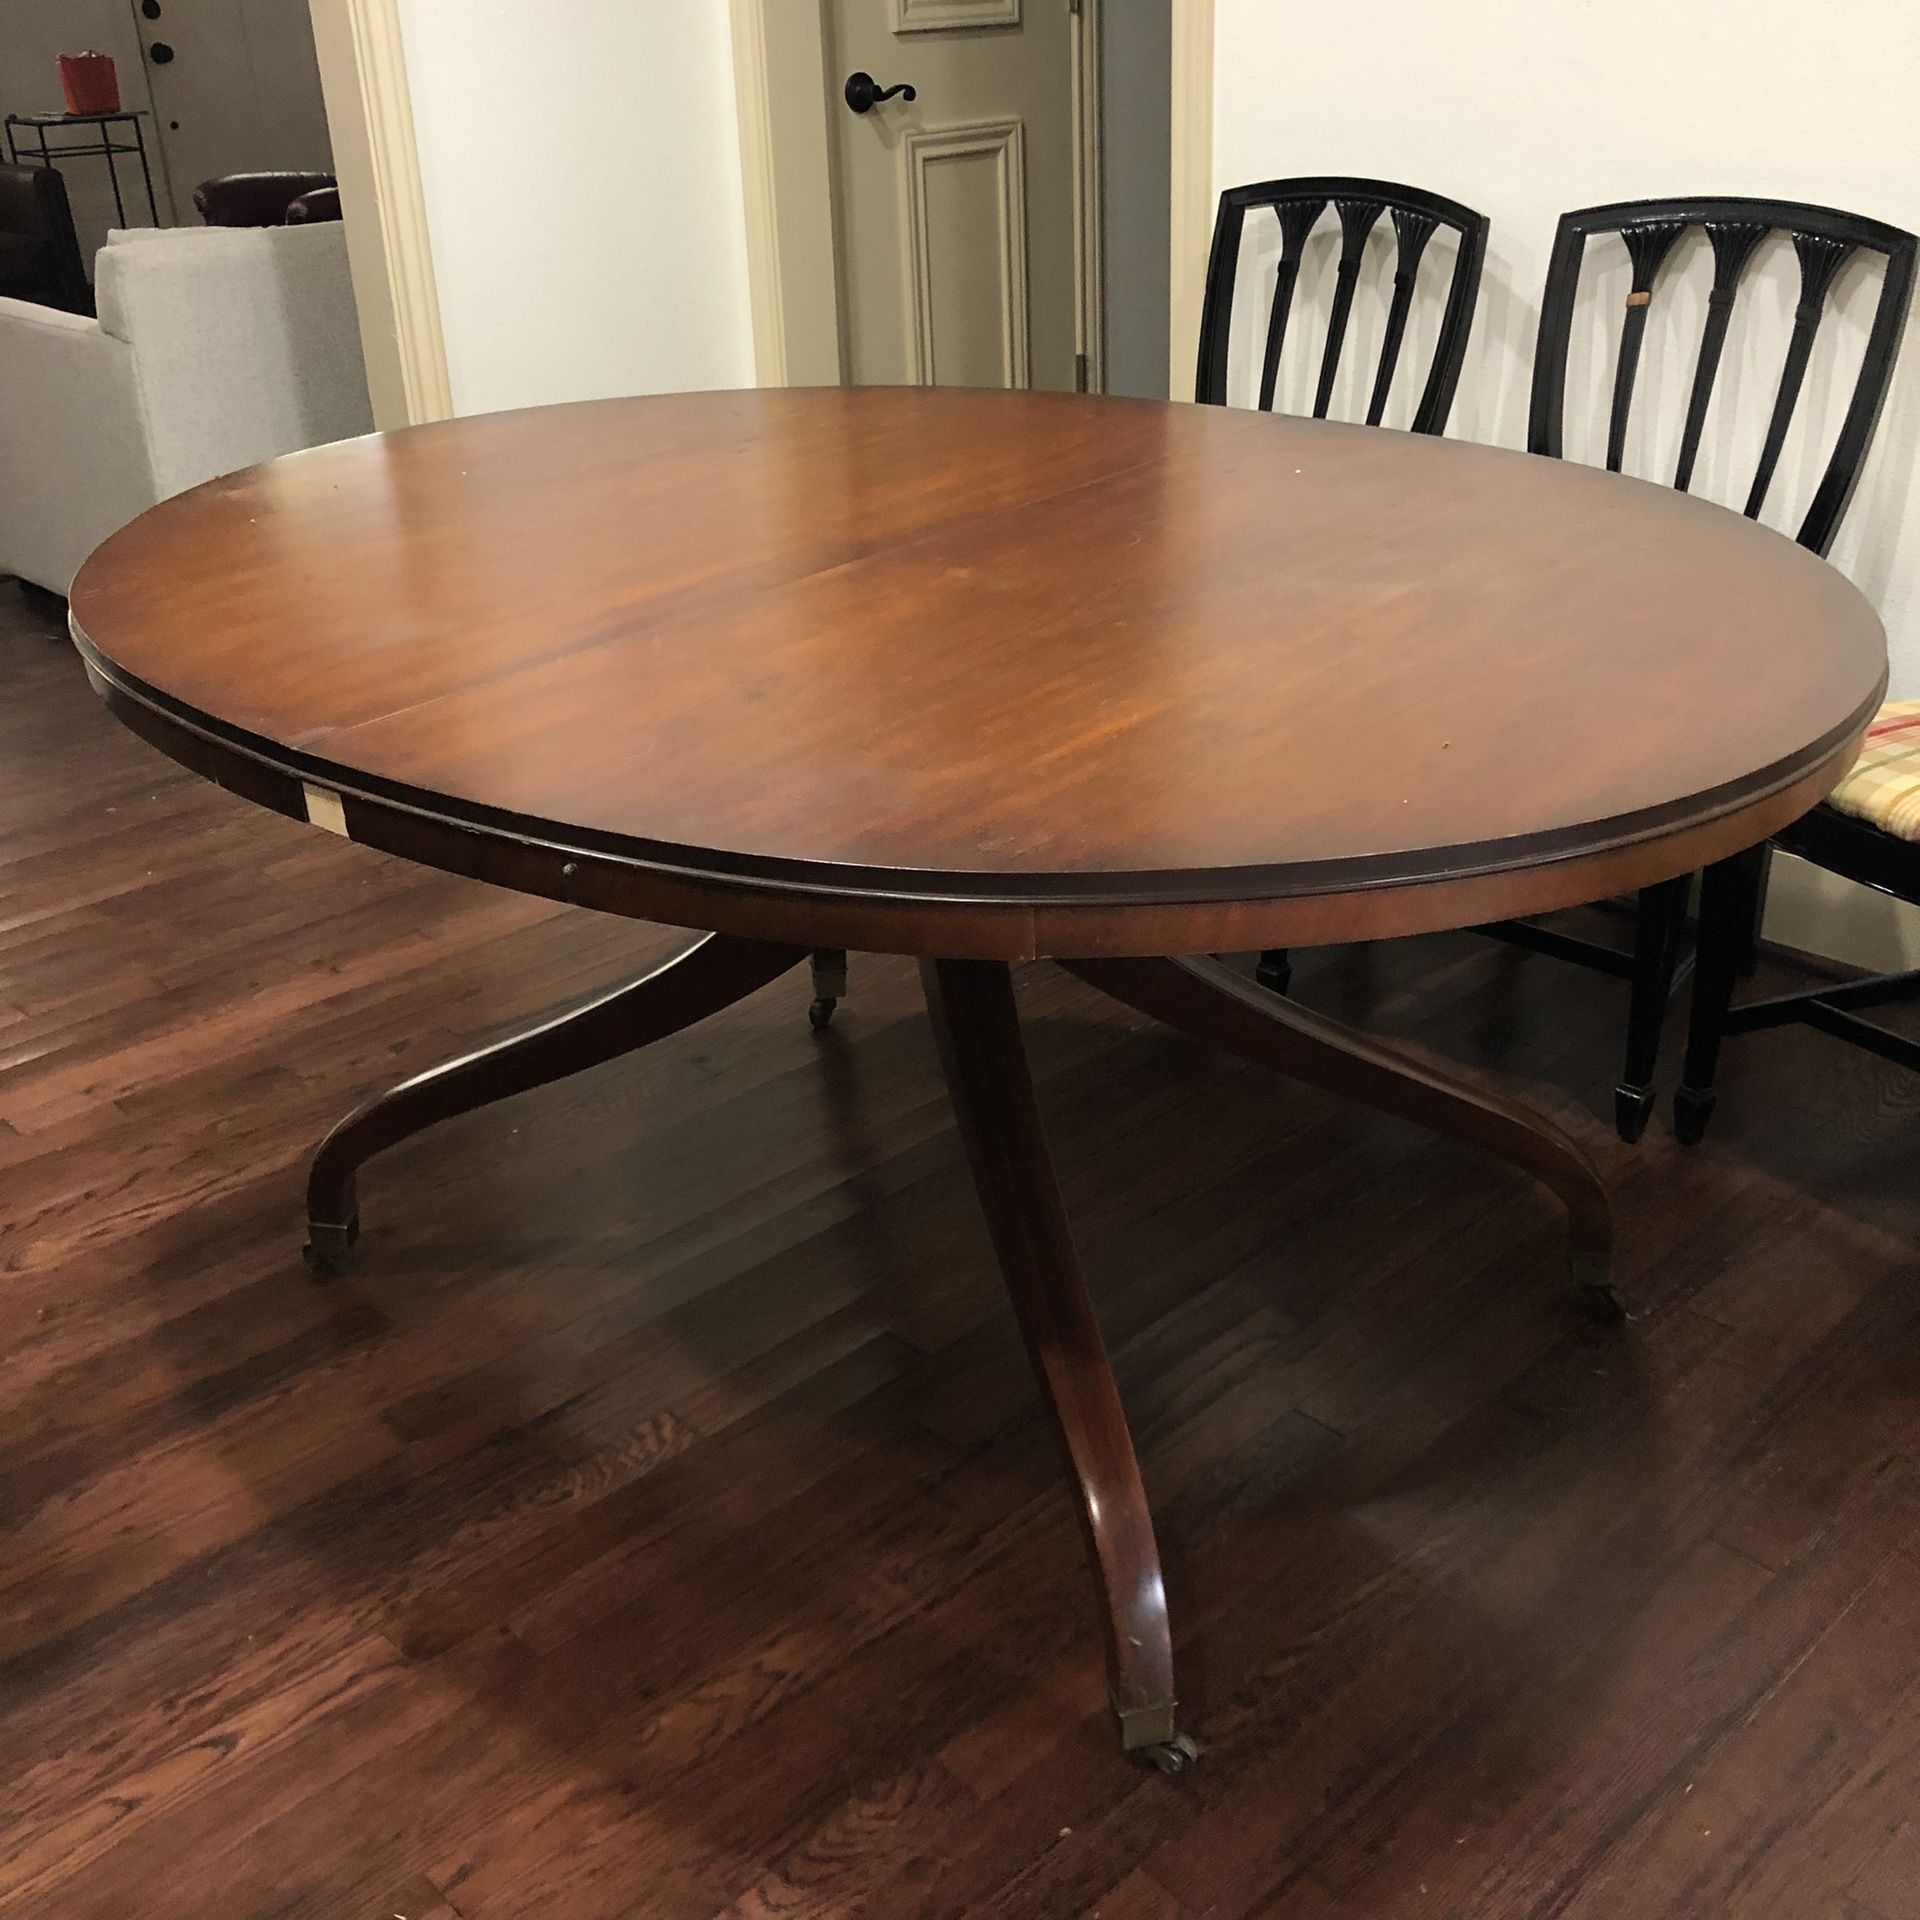 Wooden Table With Extender And Five Chairs